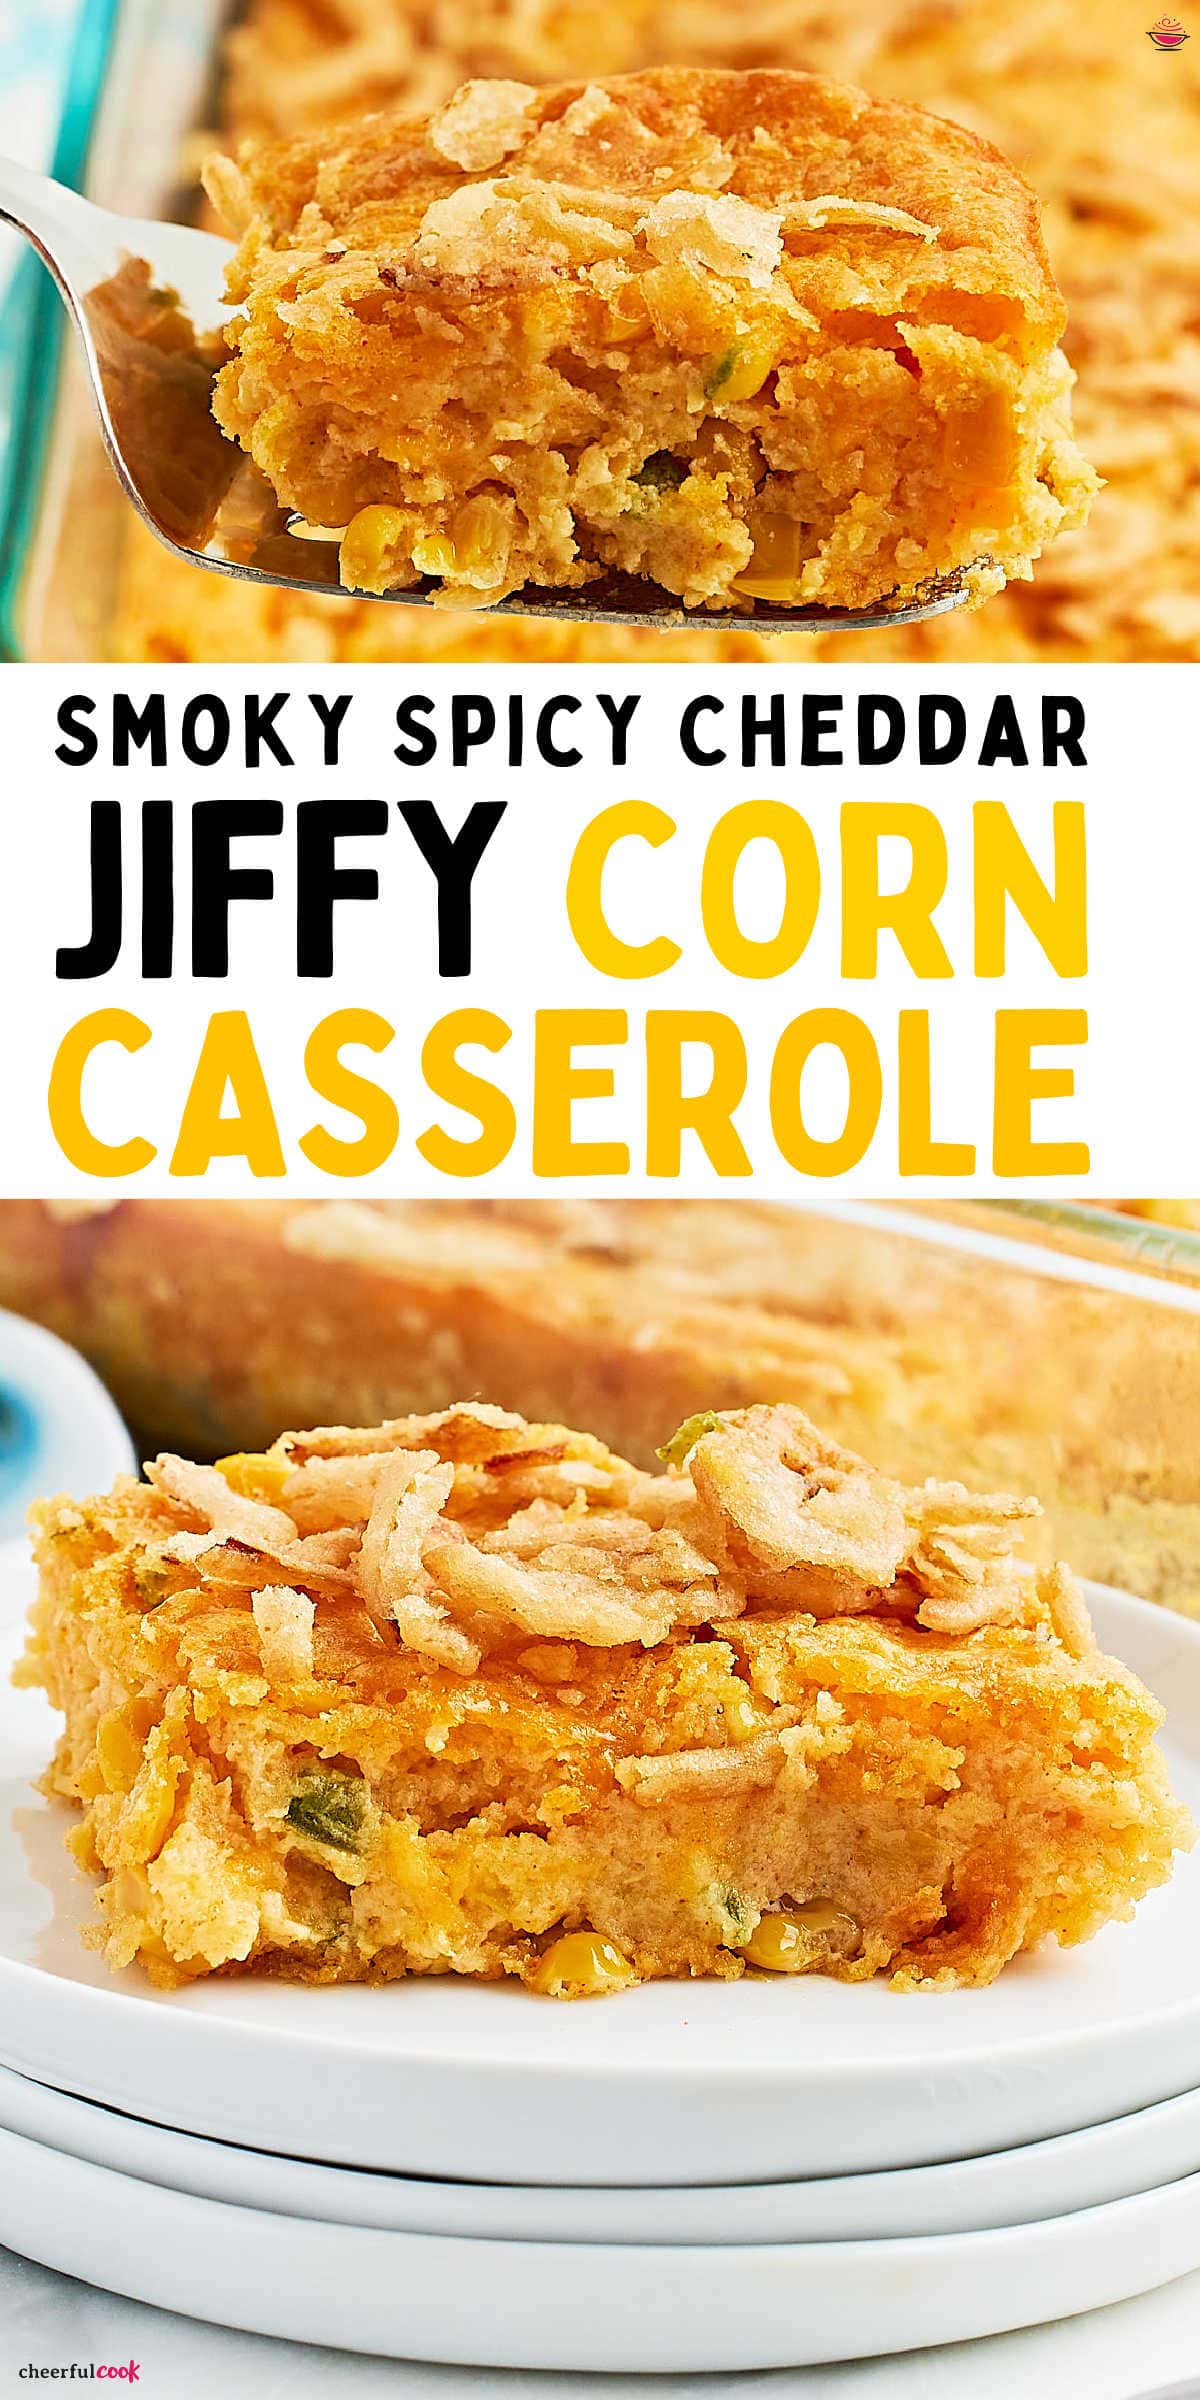 Add a twist to your classic corn casserole with this simple recipe! The addition of jalapenos and smoked paprika creates a delightful, flavor-rich side dish perfect for any meal. #cheerfulcook #CornCasserole #ComfortFood #easyrecipes #SideDish #thanksgiving #christmasdinner #casserolerecipes via @cheerfulcook